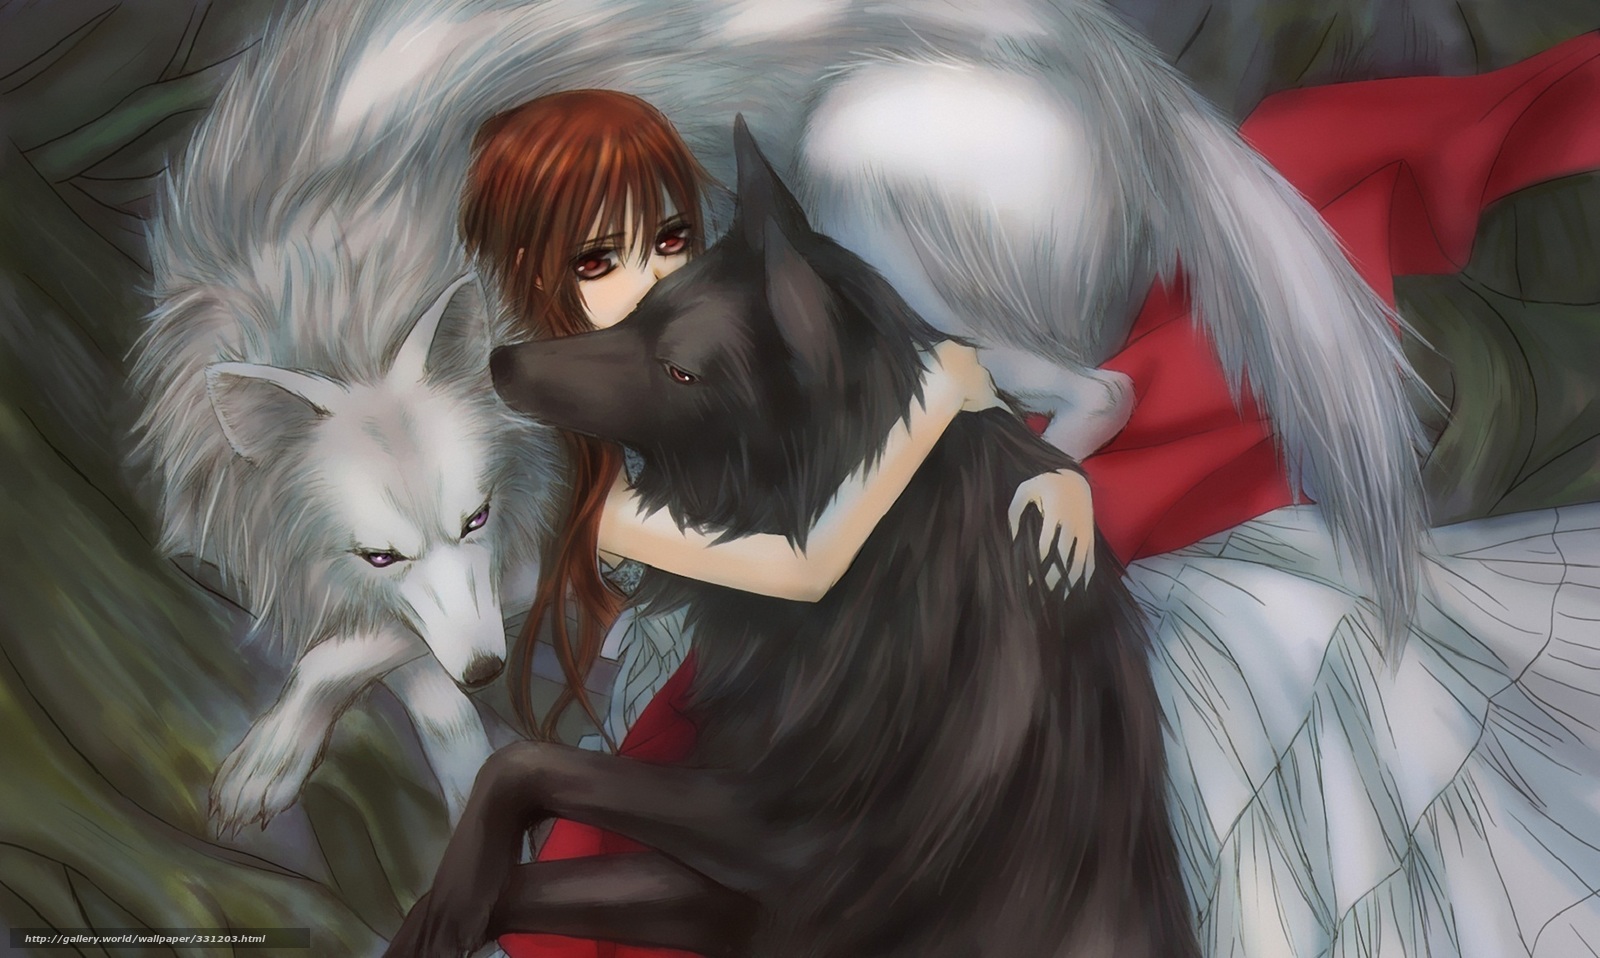 Download Wallpaper Knight Vampire, Girl, Wolves, Embrace - Anime Girl And Wolf - HD Wallpaper 